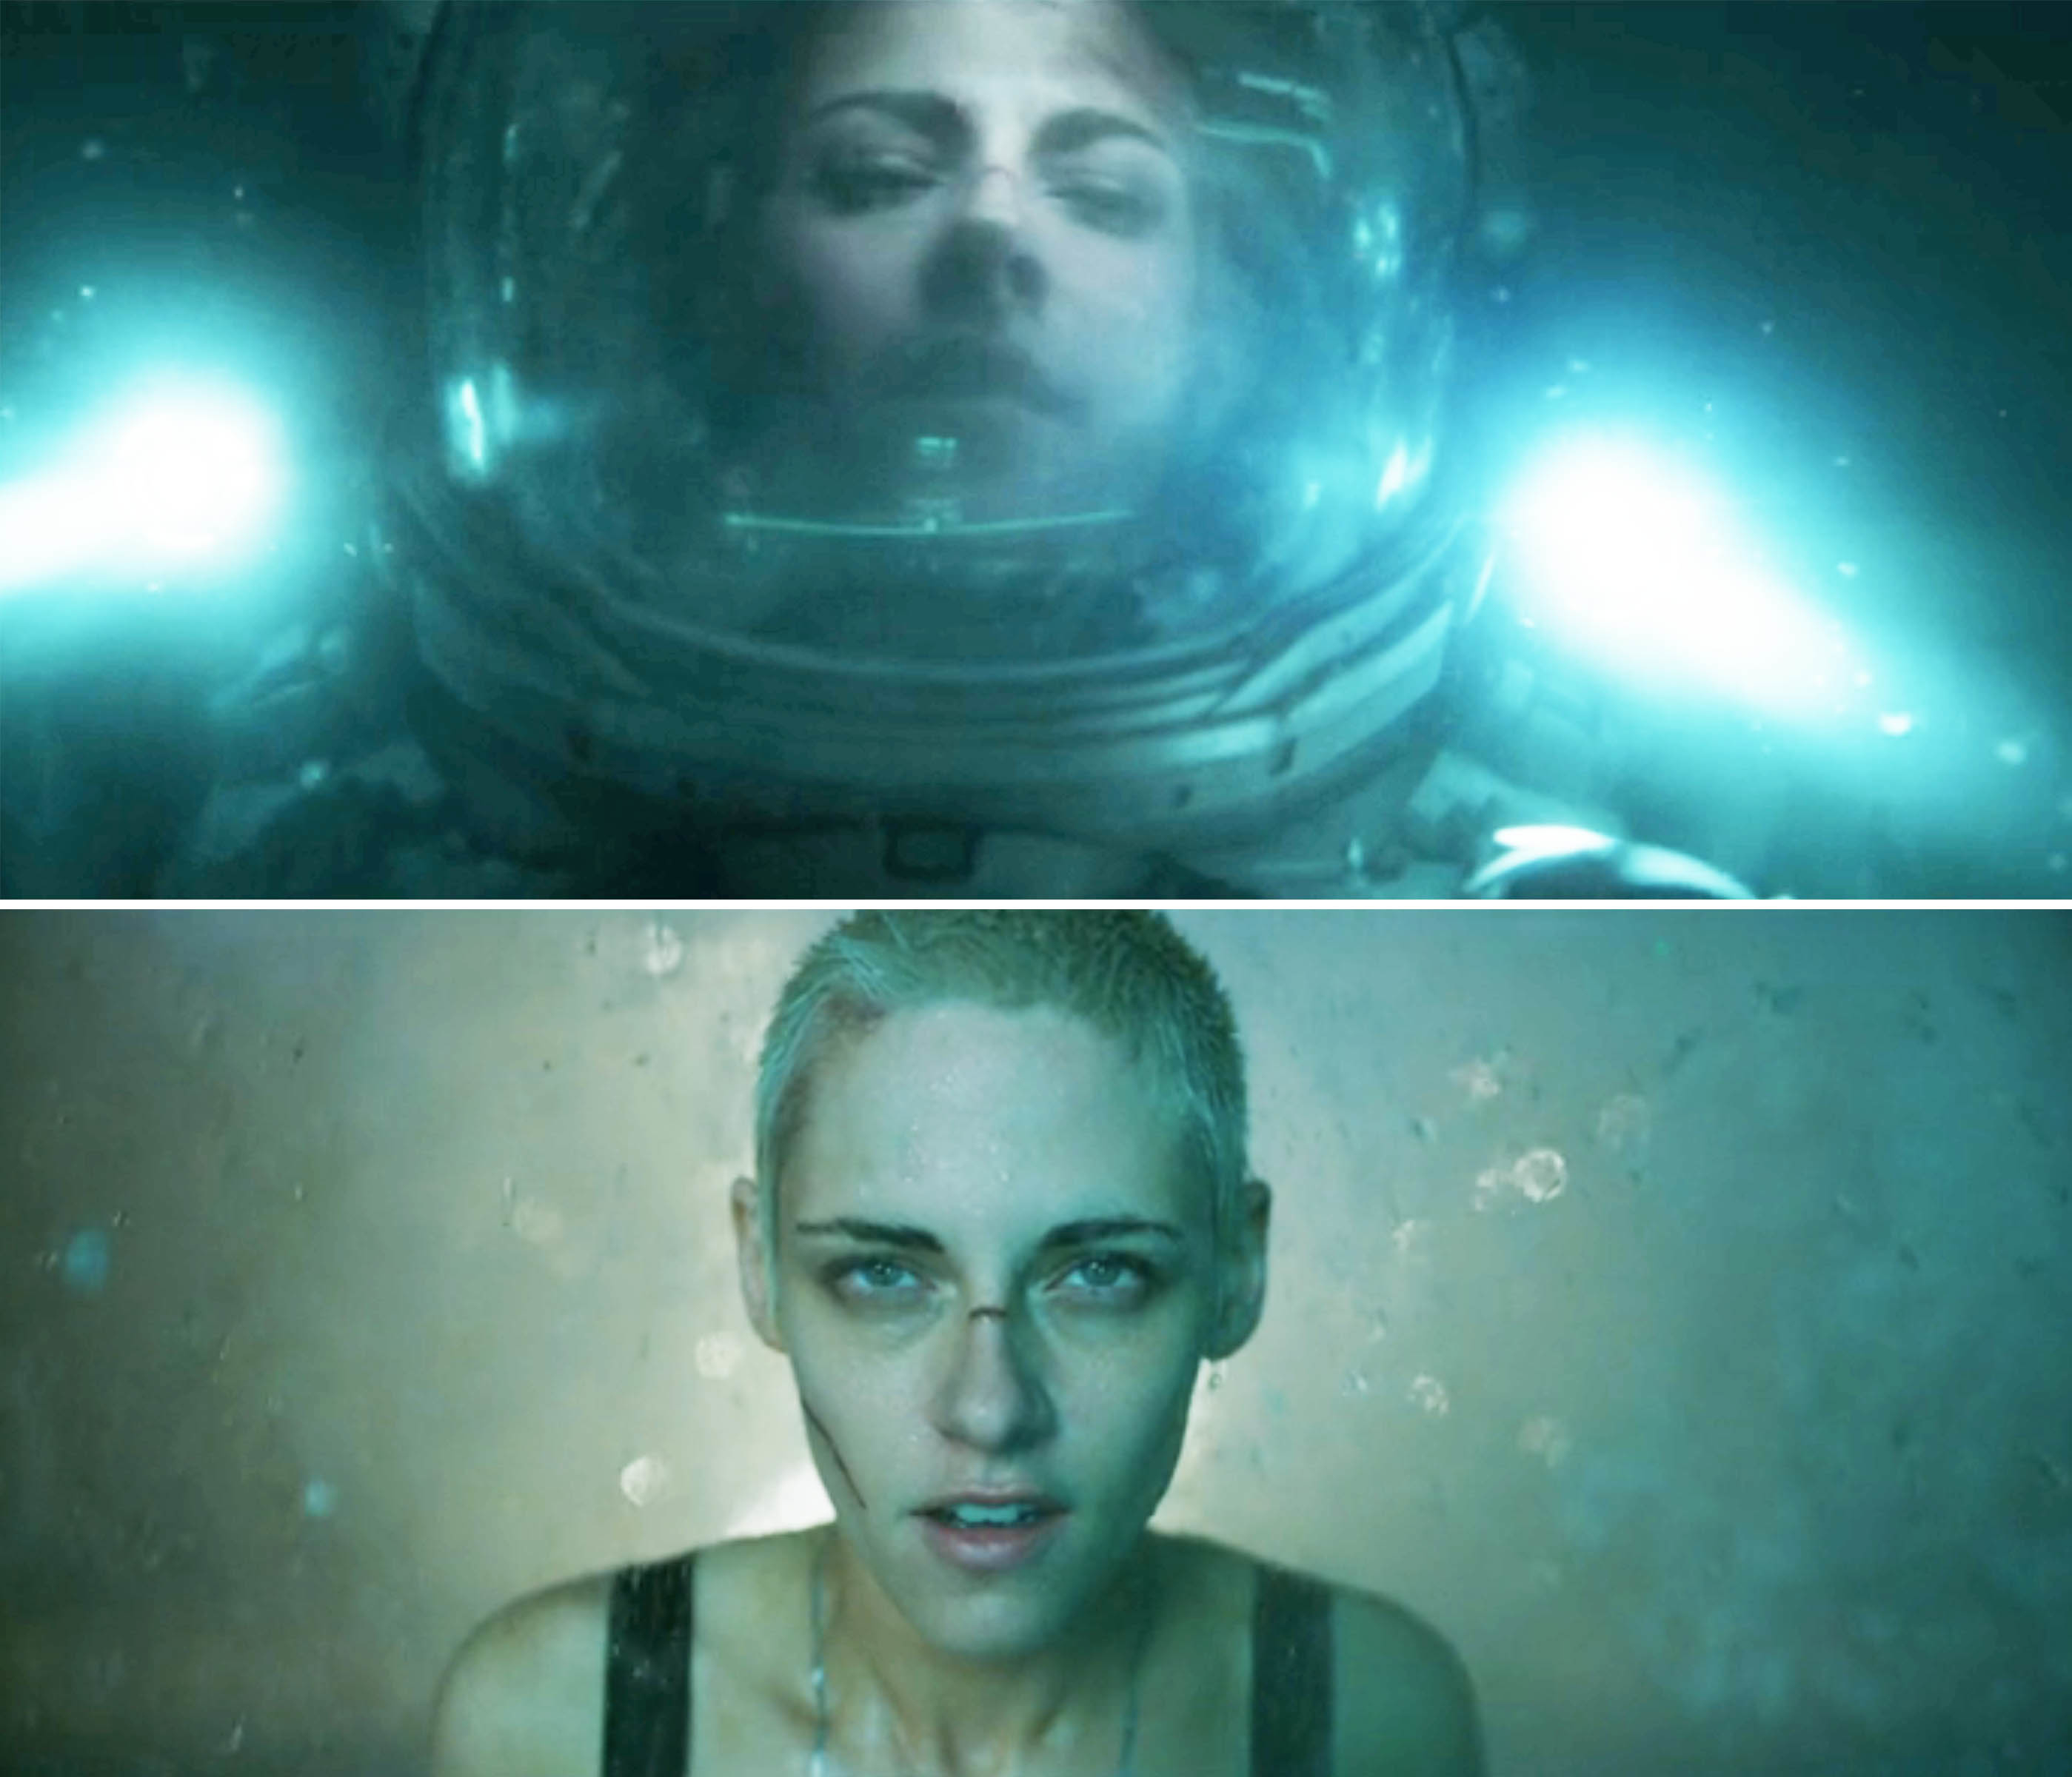 Kristen Stewart in a diving suit and helmet, top, and intense expression underwater, bottom, in a film scene